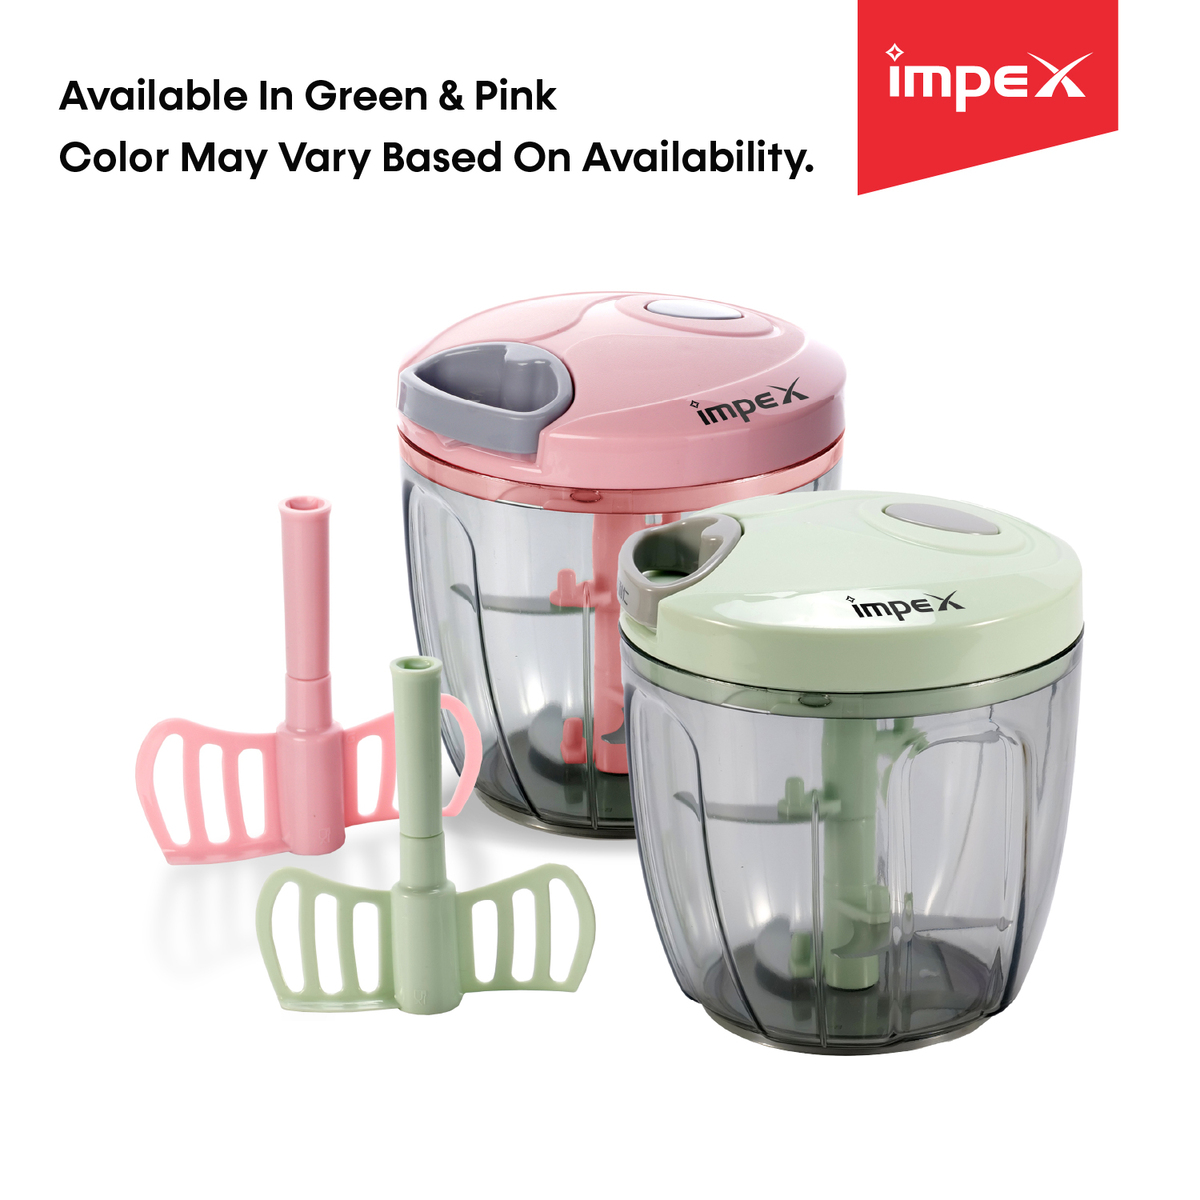 Impex MS 900 ml Mini Slicer with Stainless Steel Sharp Blades